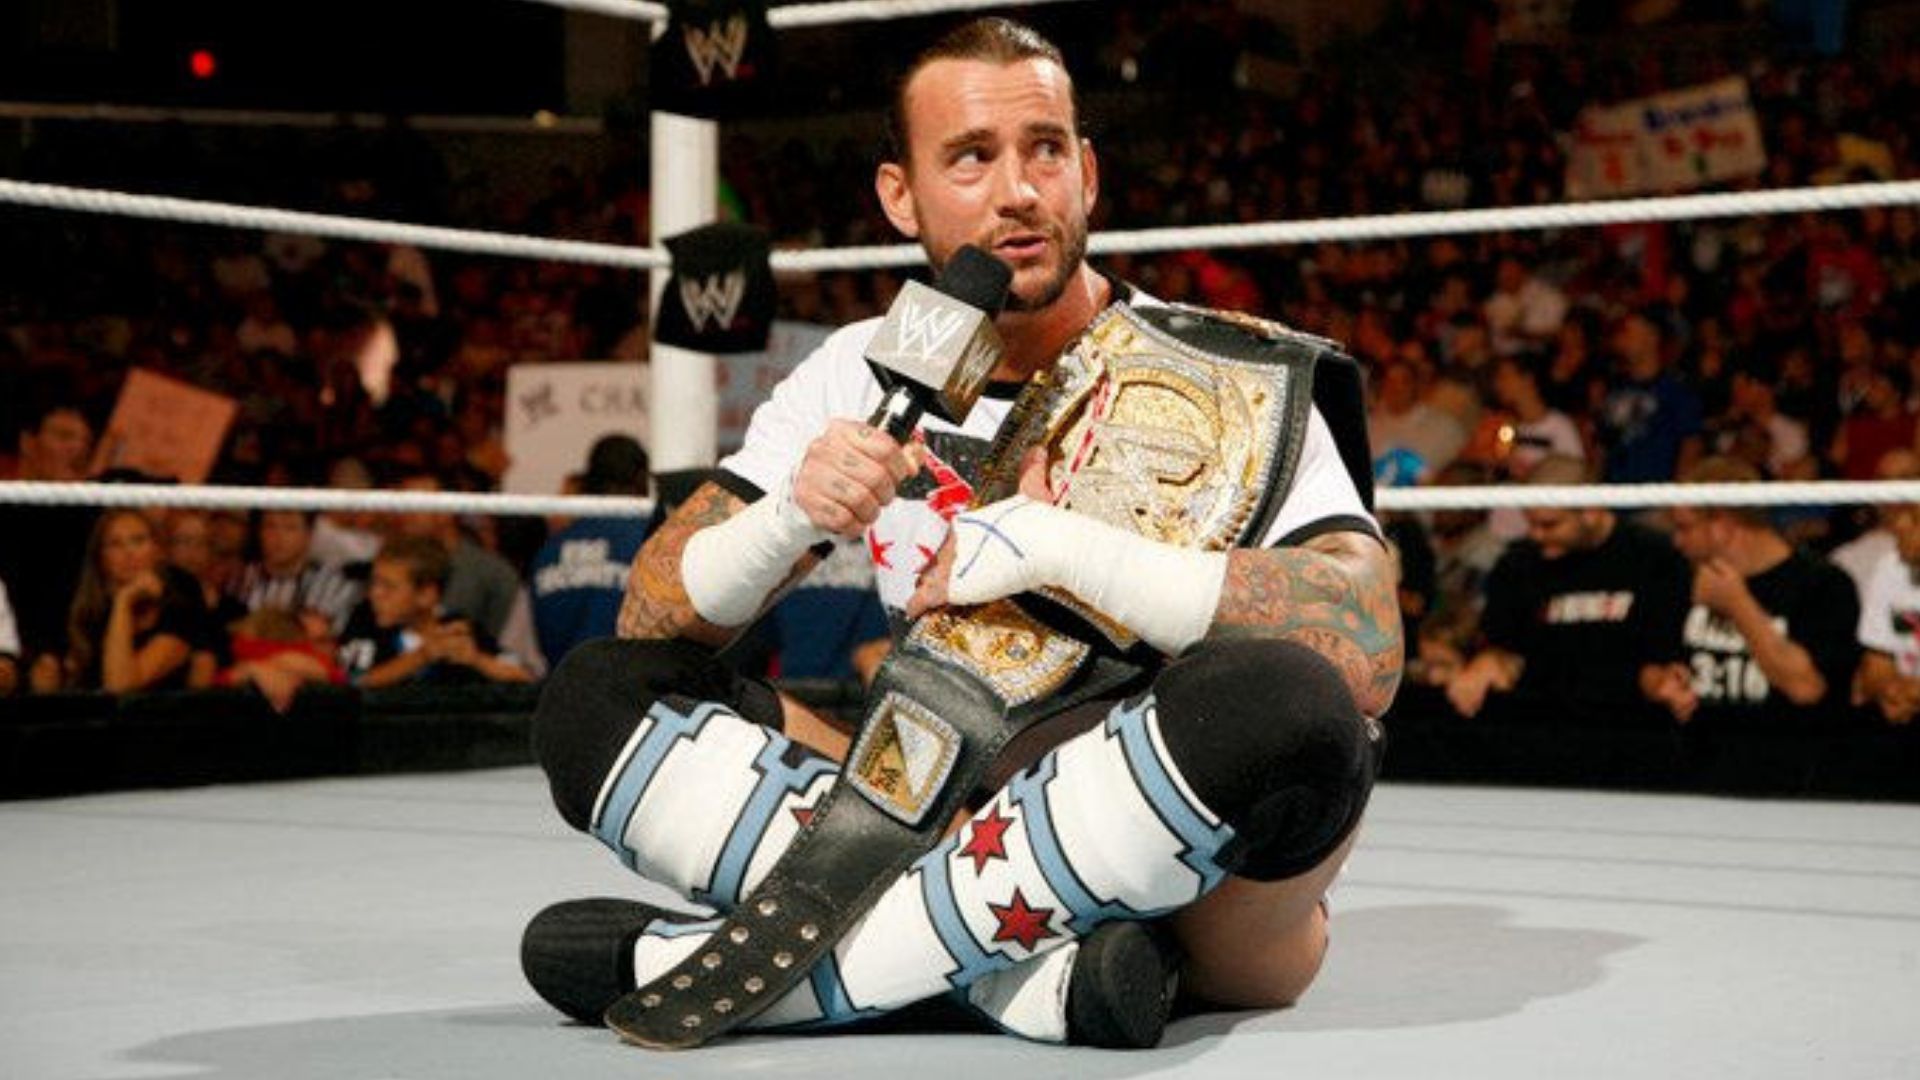 CM Punk during his time in WWE. Image Credits: wwe.com 